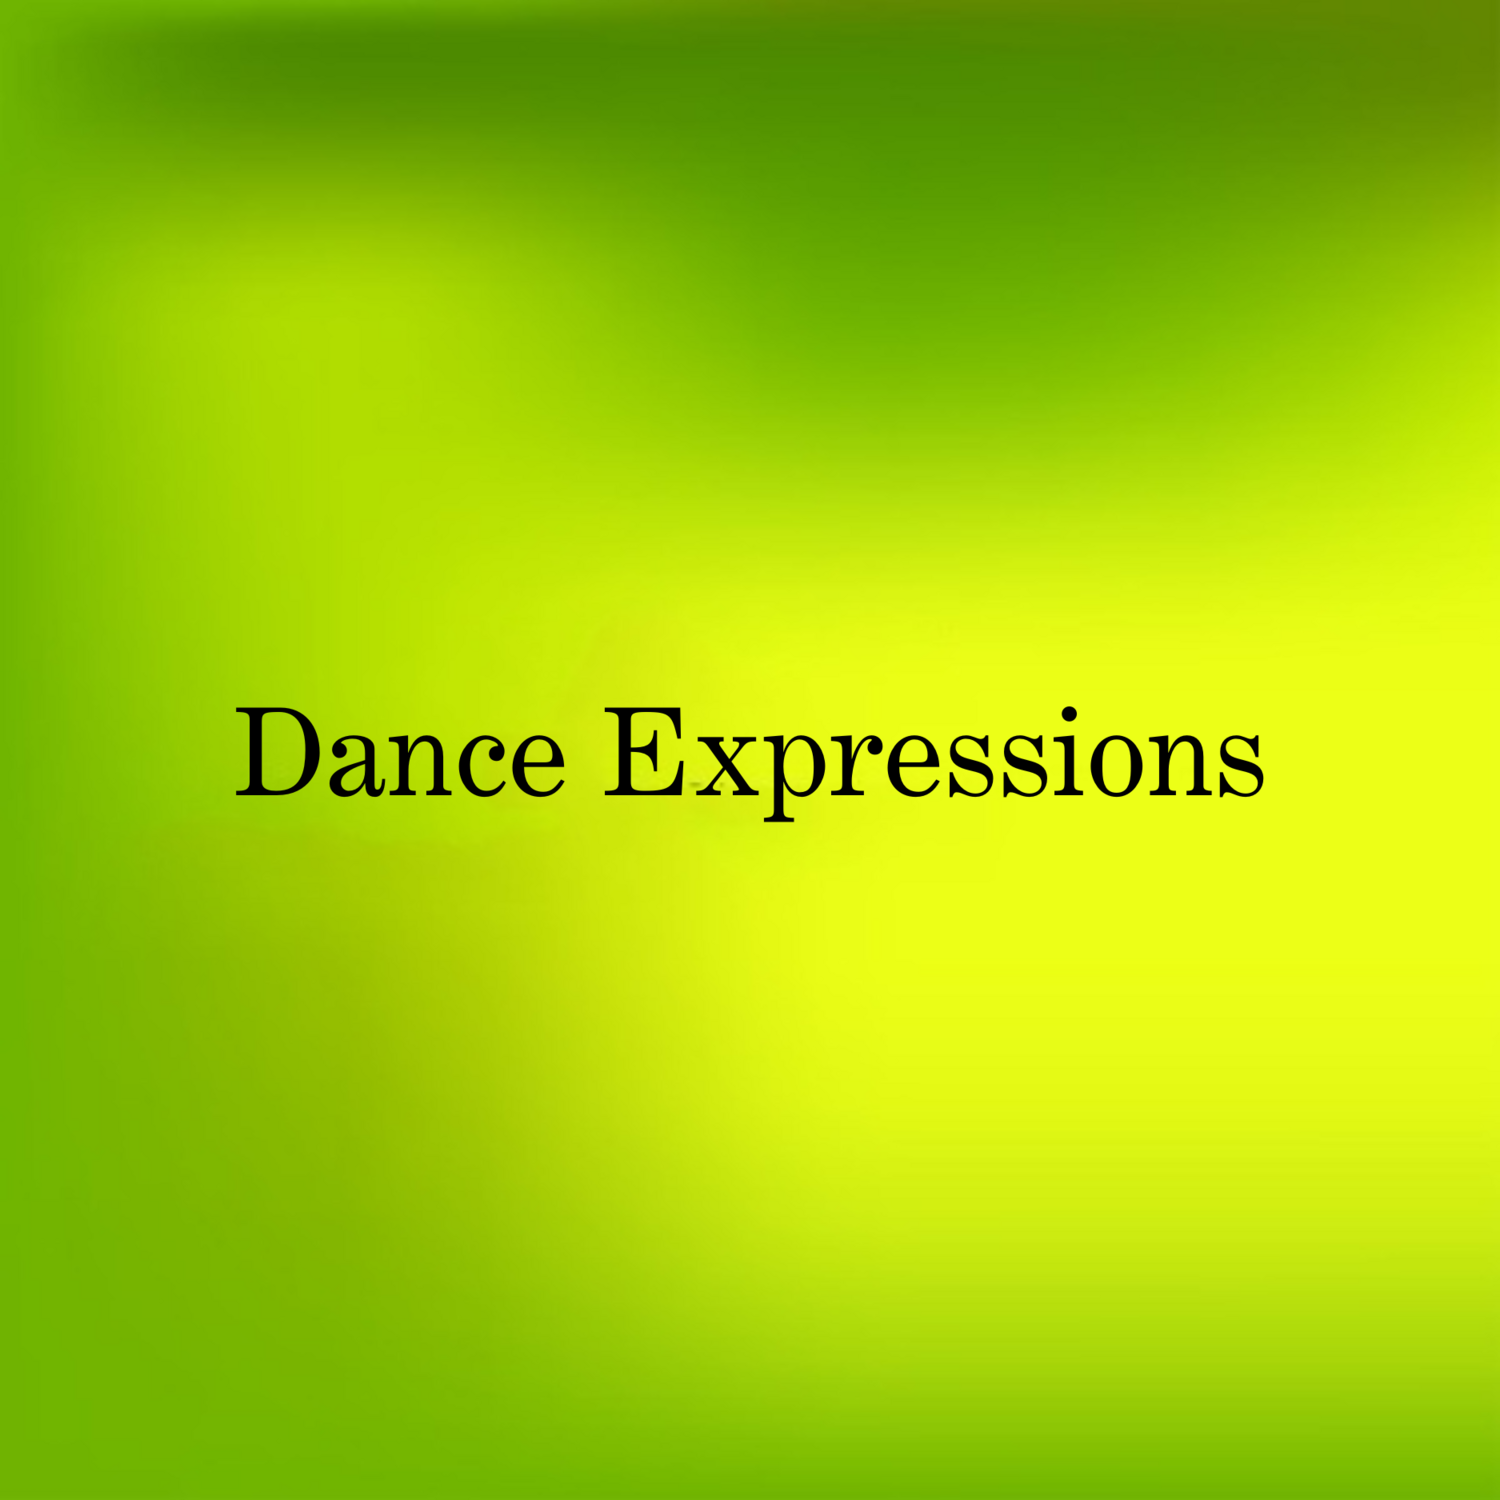 Dance Expressions